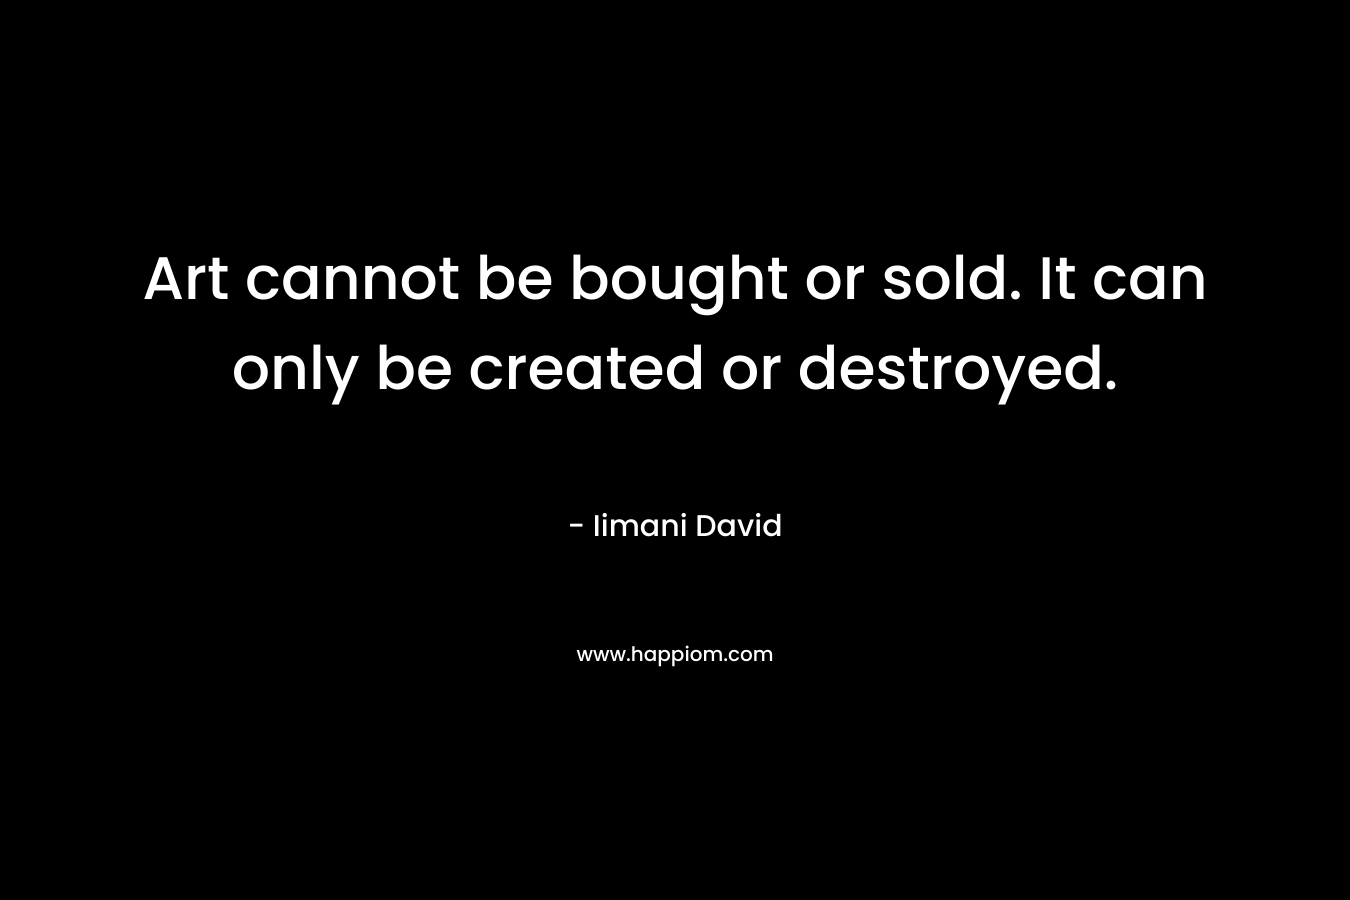 Art cannot be bought or sold. It can only be created or destroyed.